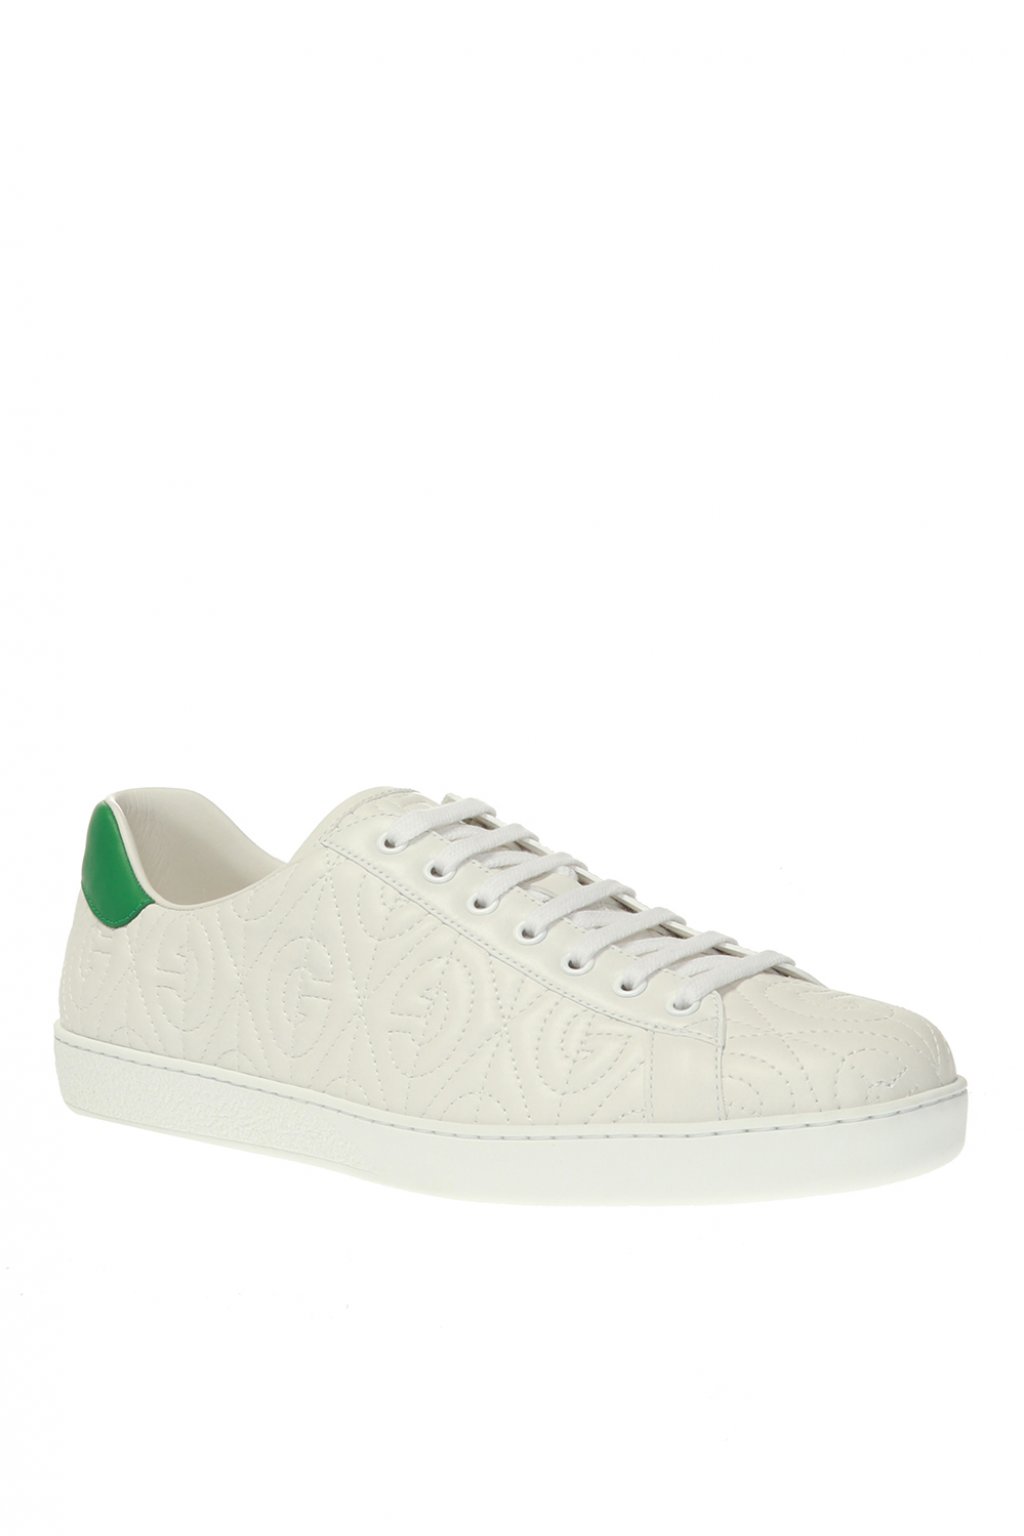 Gucci 'Ace' sneakers